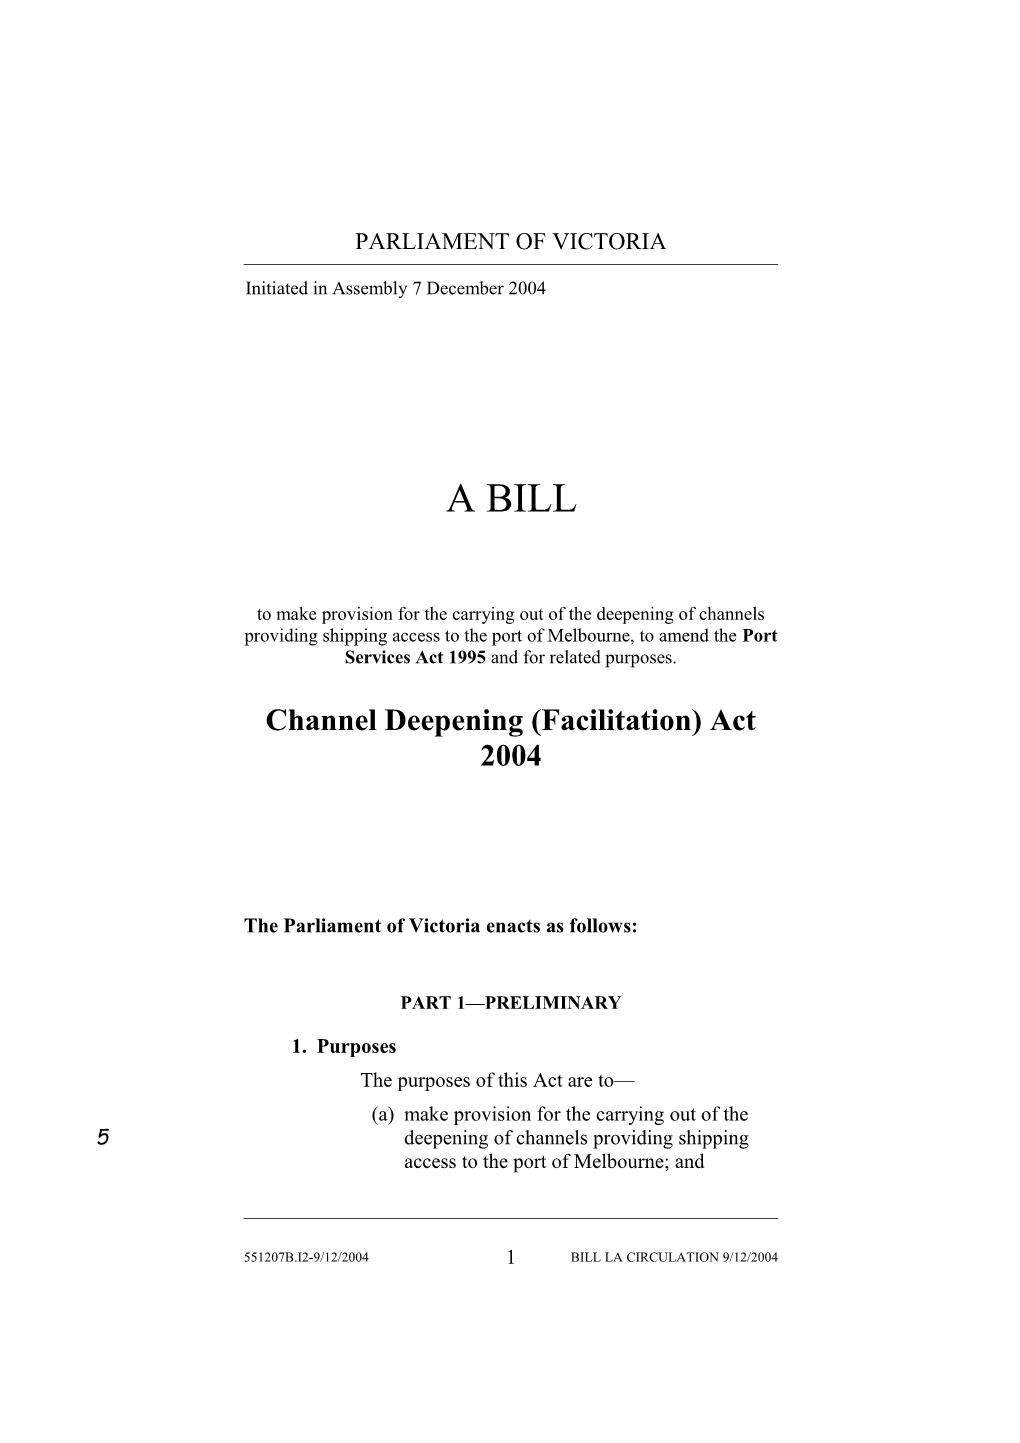 Channel Deepening (Facilitation) Act 2004